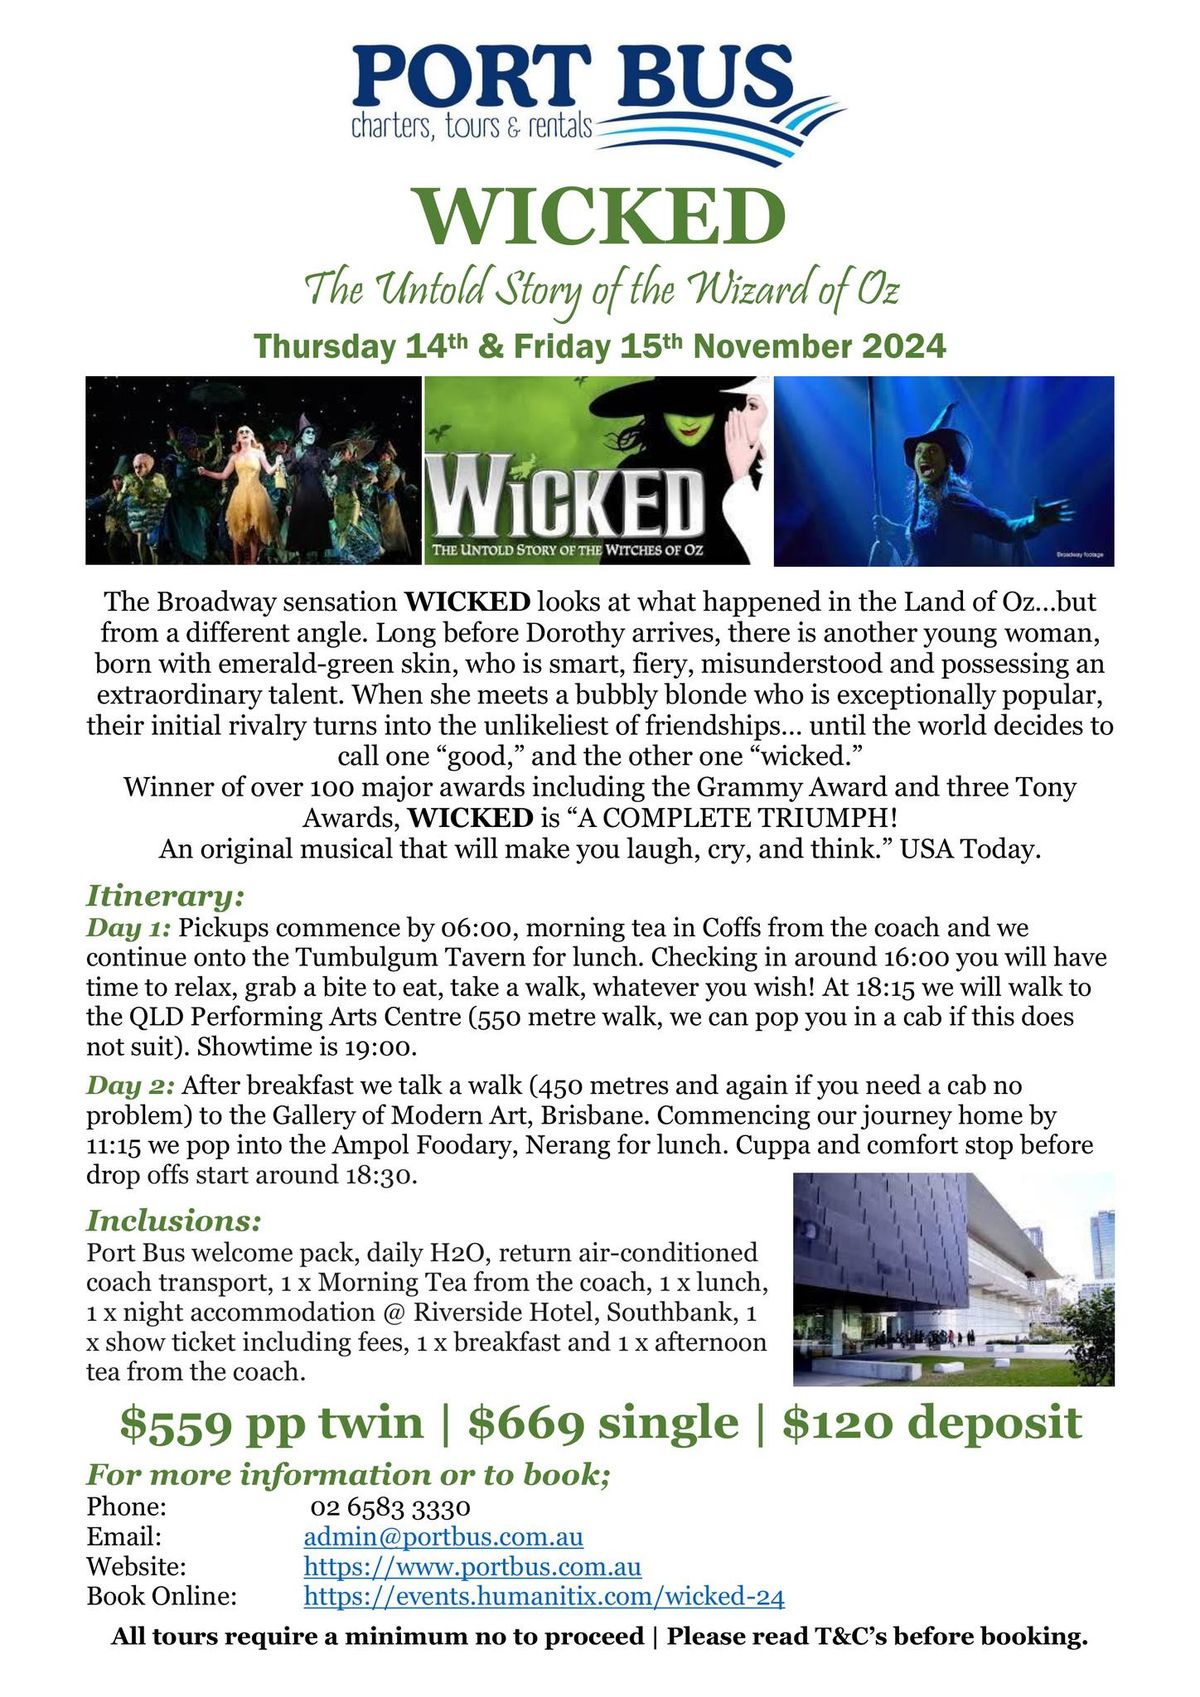 WICKED! The Untold Story of the Wizard of Oz.